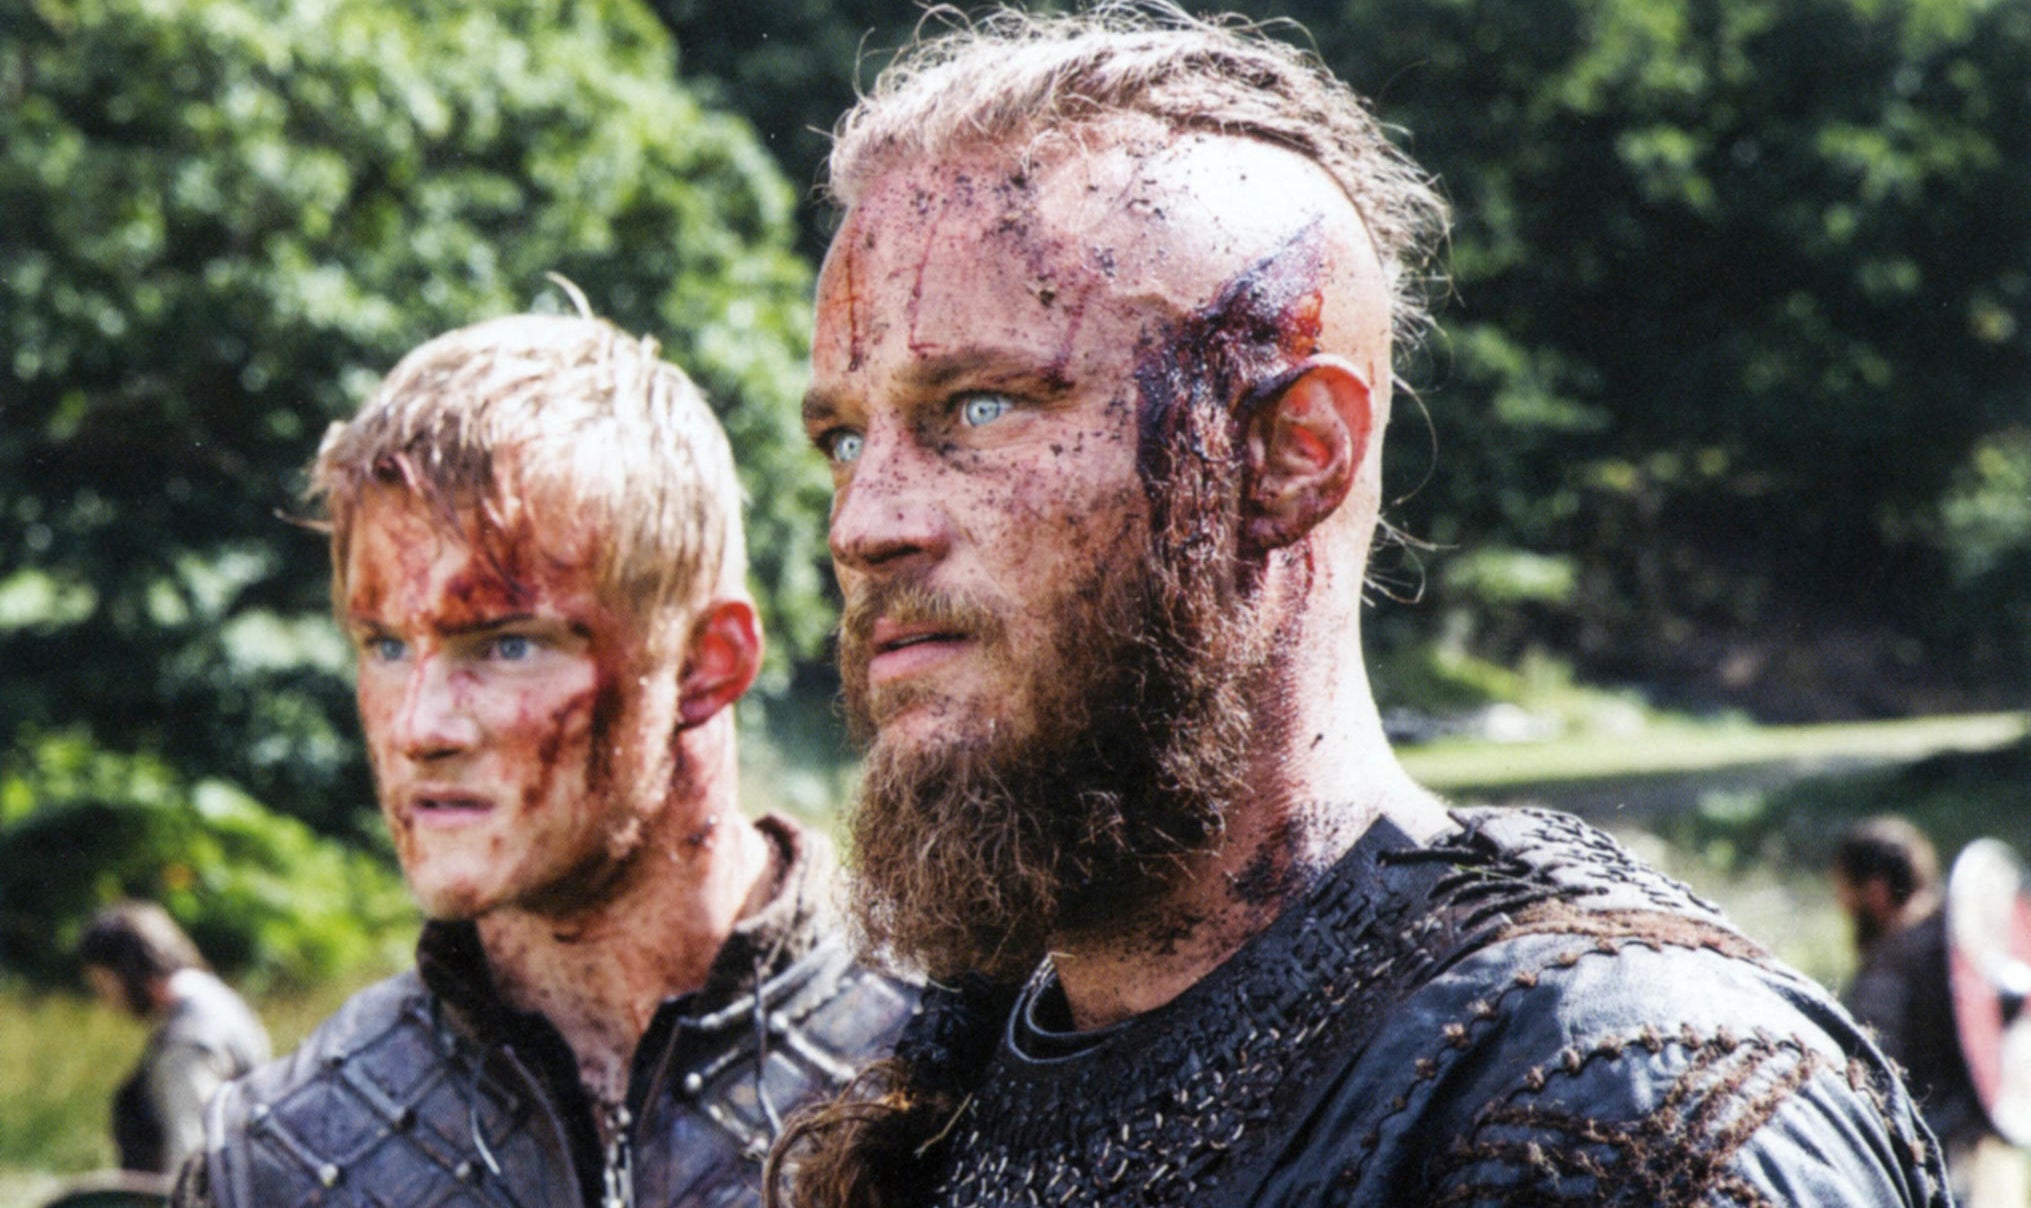 Two young vikings soaked in blood stare incredulously at an unfolding dilemma